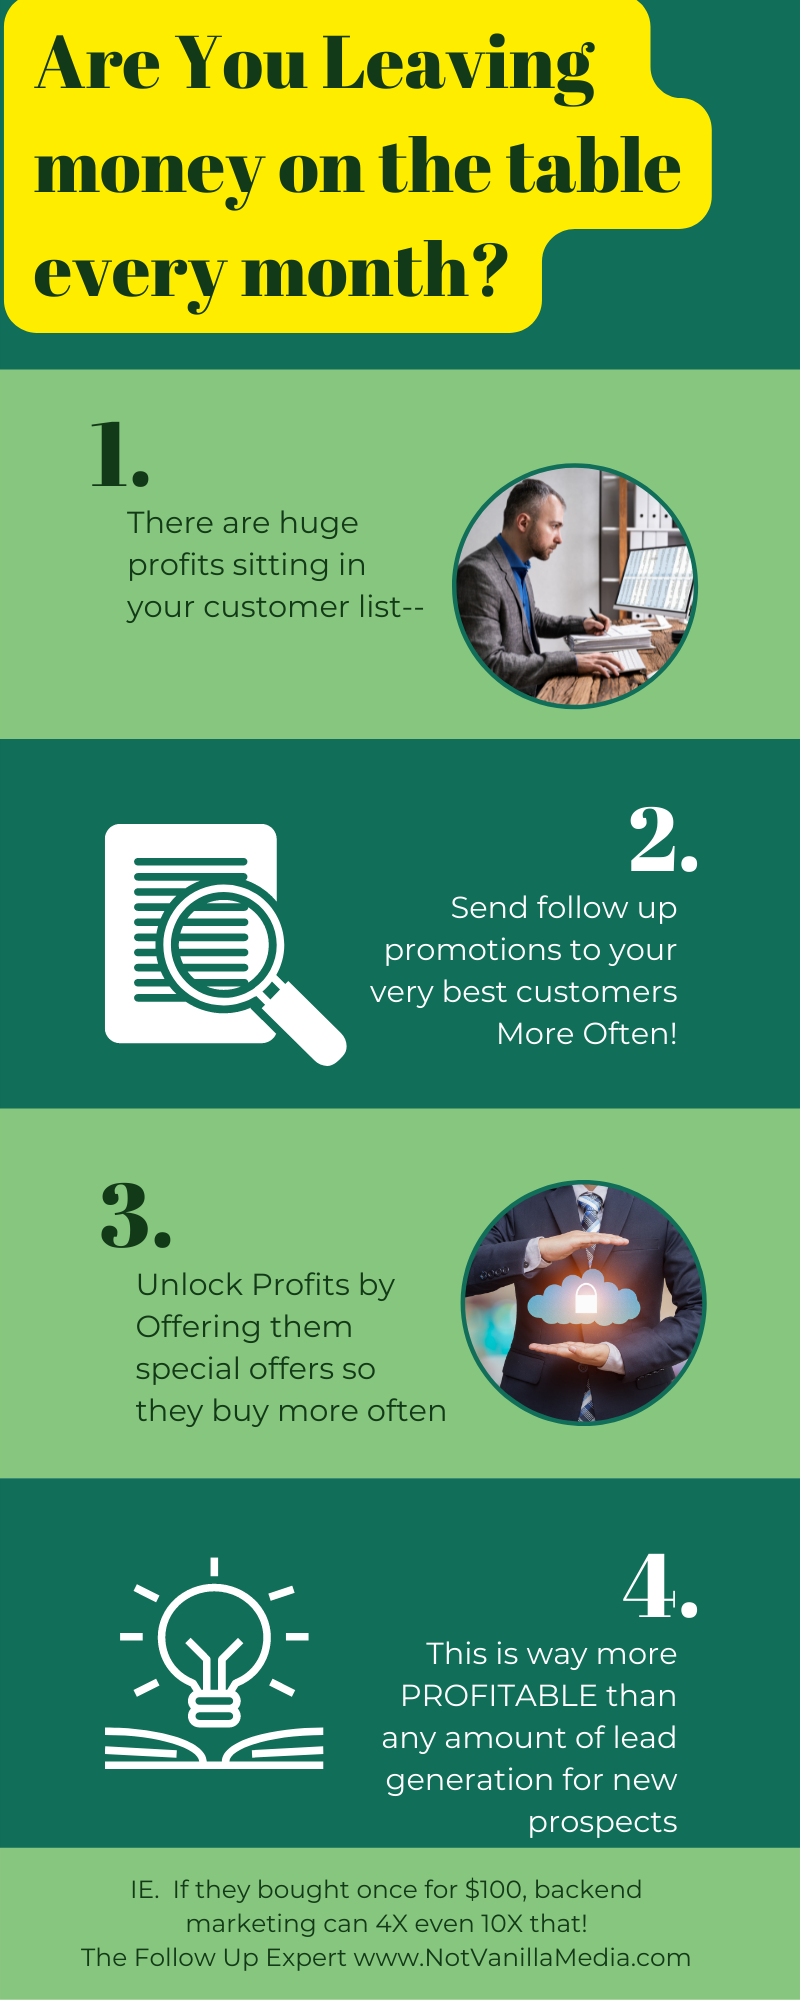 more profits from backend and follow up sales infographic